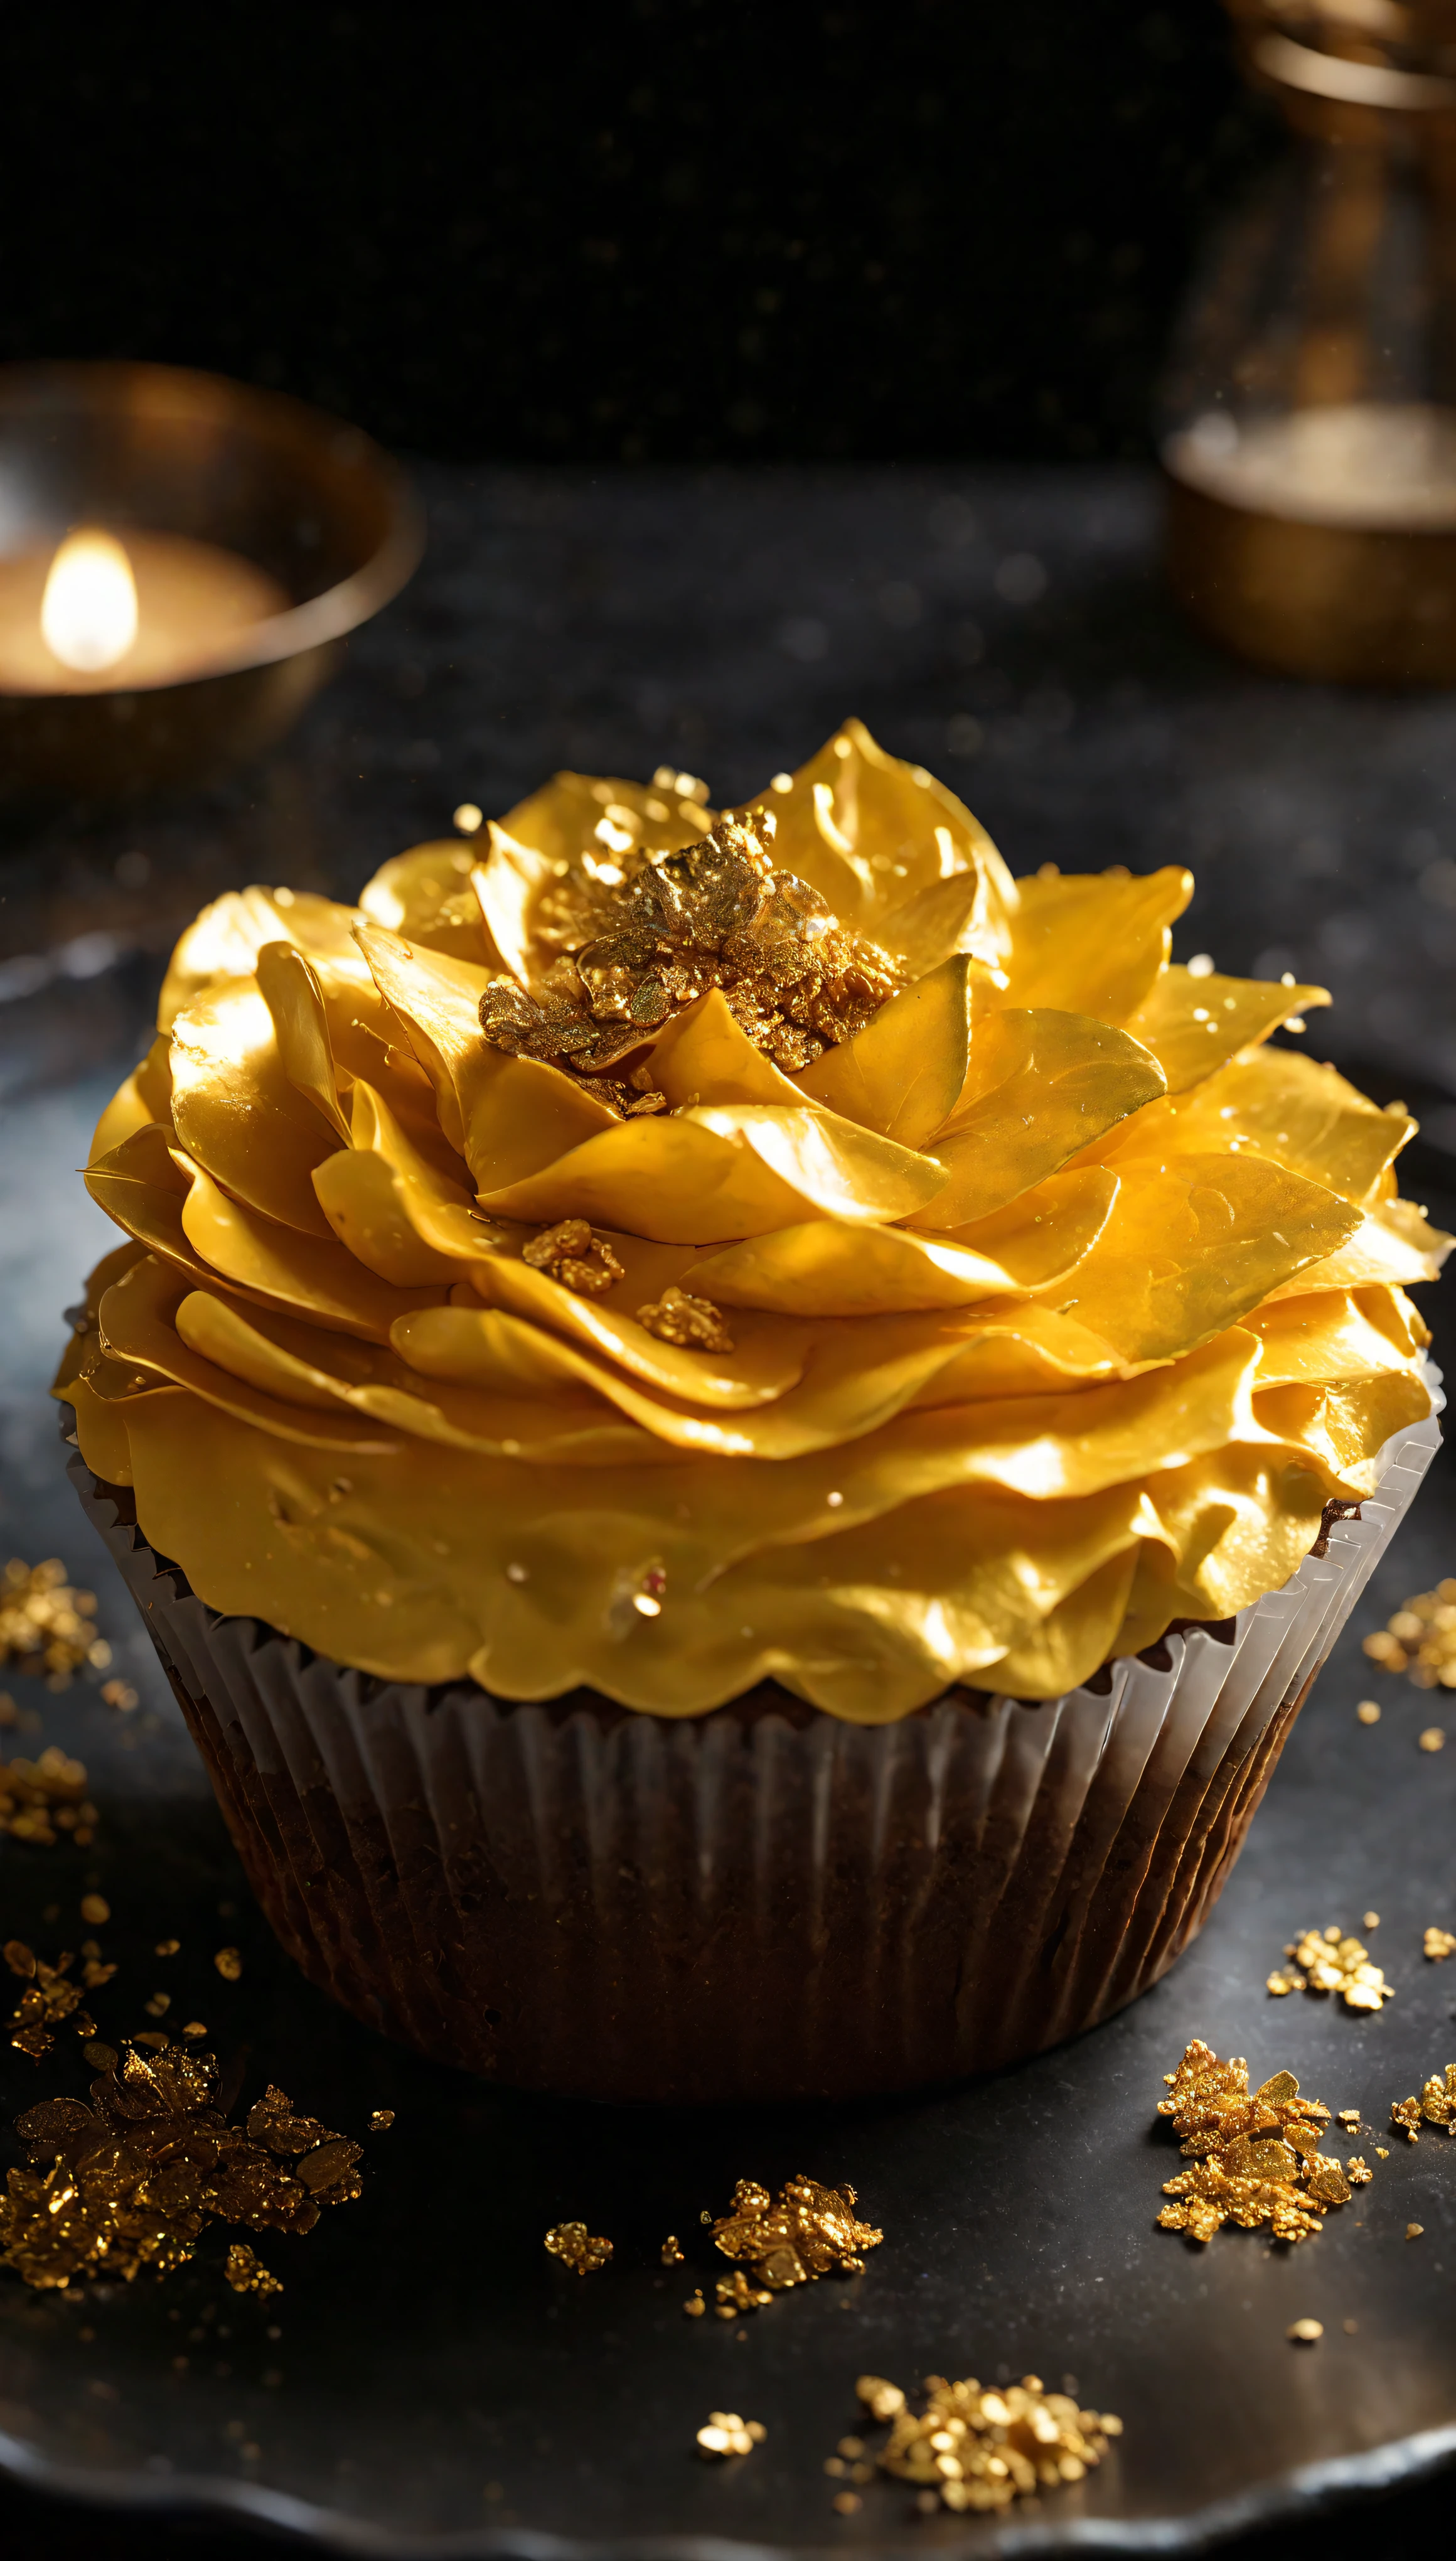 ((Masterpiece in maximum 16K resolution):1.6),((soft_color_photograpy:)1.5), ((Ultra-Detailed):1.4),((Movie-like still images and dynamic angles):1.3). | (Macro shot cinematic photo of delightful dessert with micro gold leaf), (edible micro gold leaf), (focus on the dessert), (macro lens), (exotic cuisines), (Candles), (luminous object), (delightful atmosphere), (shimmer), (aesthetic dessert accesories), (visual experience),(Realism), (Realistic),award-winning graphics, dark shot, film grain, extremely detailed, Digital Art, rtx, Unreal Engine, scene concept anti glare effect, All captured with sharp focus. | Rendered in ultra-high definition with UHD and retina quality, this masterpiece ensures anatomical correctness and textured skin with super detail. With a focus on high quality and accuracy, this award-winning portrayal captures every nuance in stunning 16k resolution, immersing viewers in its lifelike depiction. | ((perfect_composition, perfect_design, perfect_layout, perfect_detail, ultra_detailed)), ((enhance_all, fix_everything)), More Detail, Enhance.